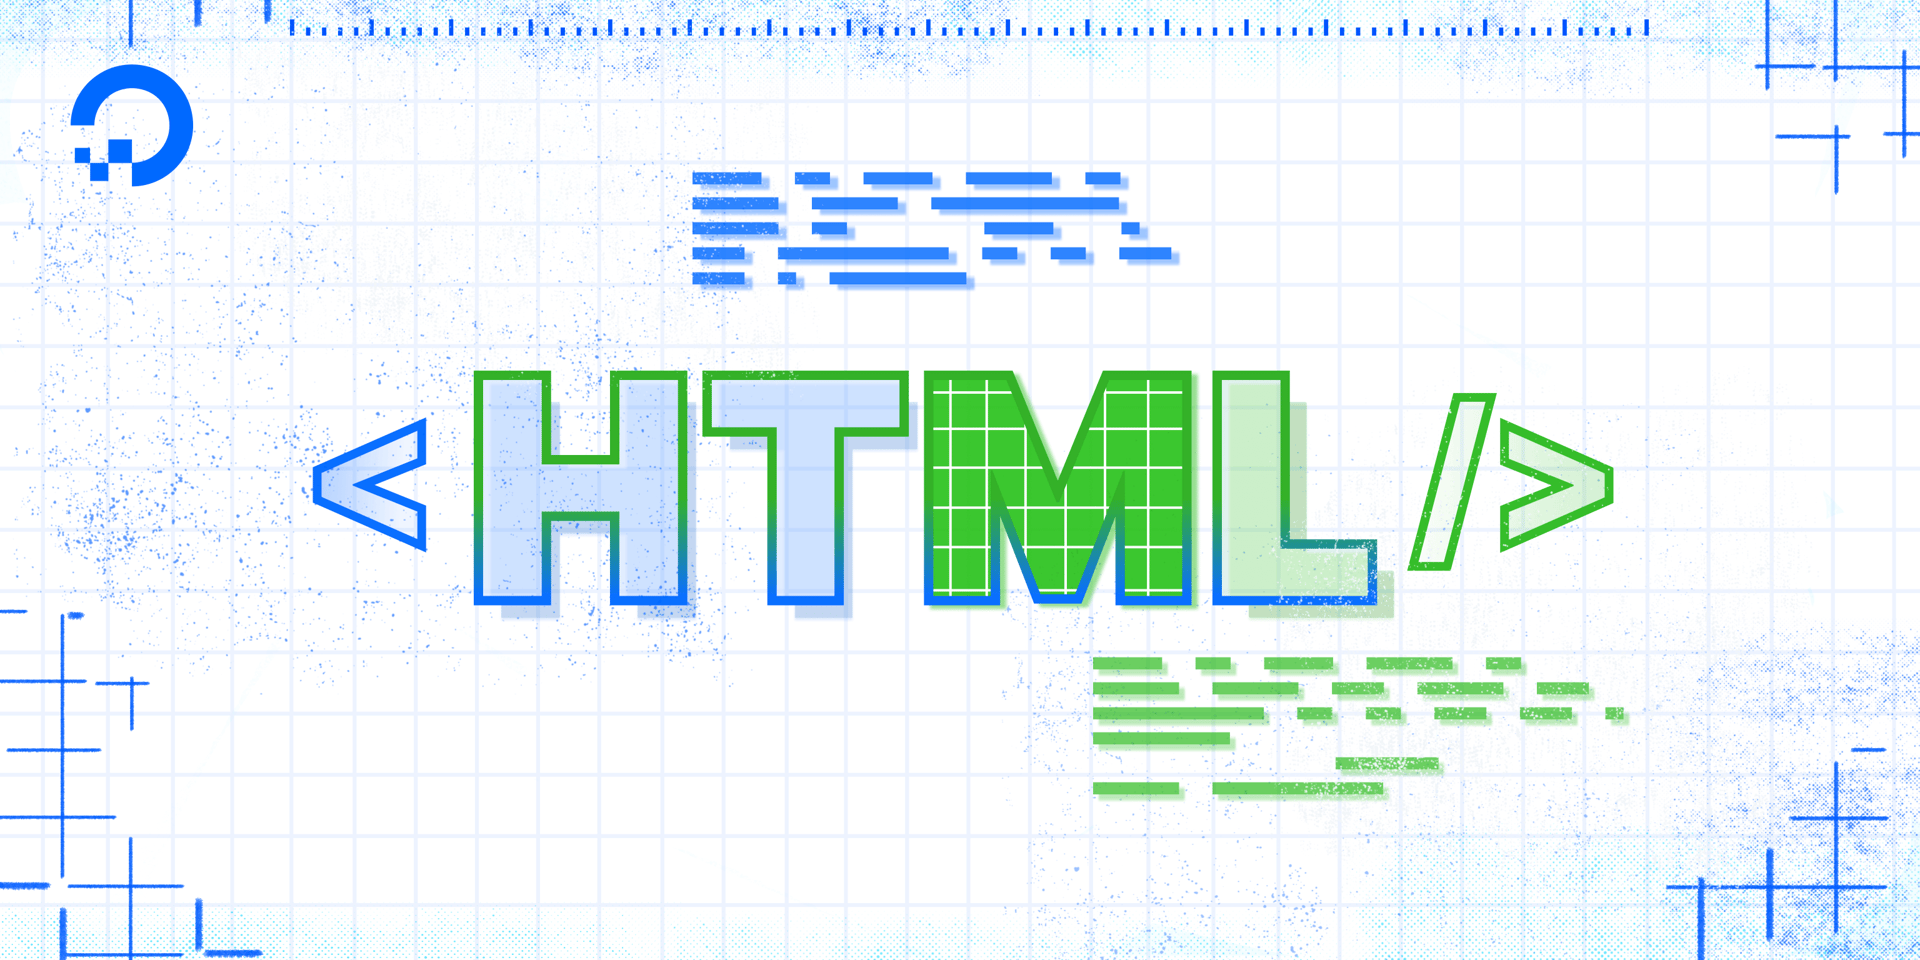 How To View the Source Code of an HTML Document